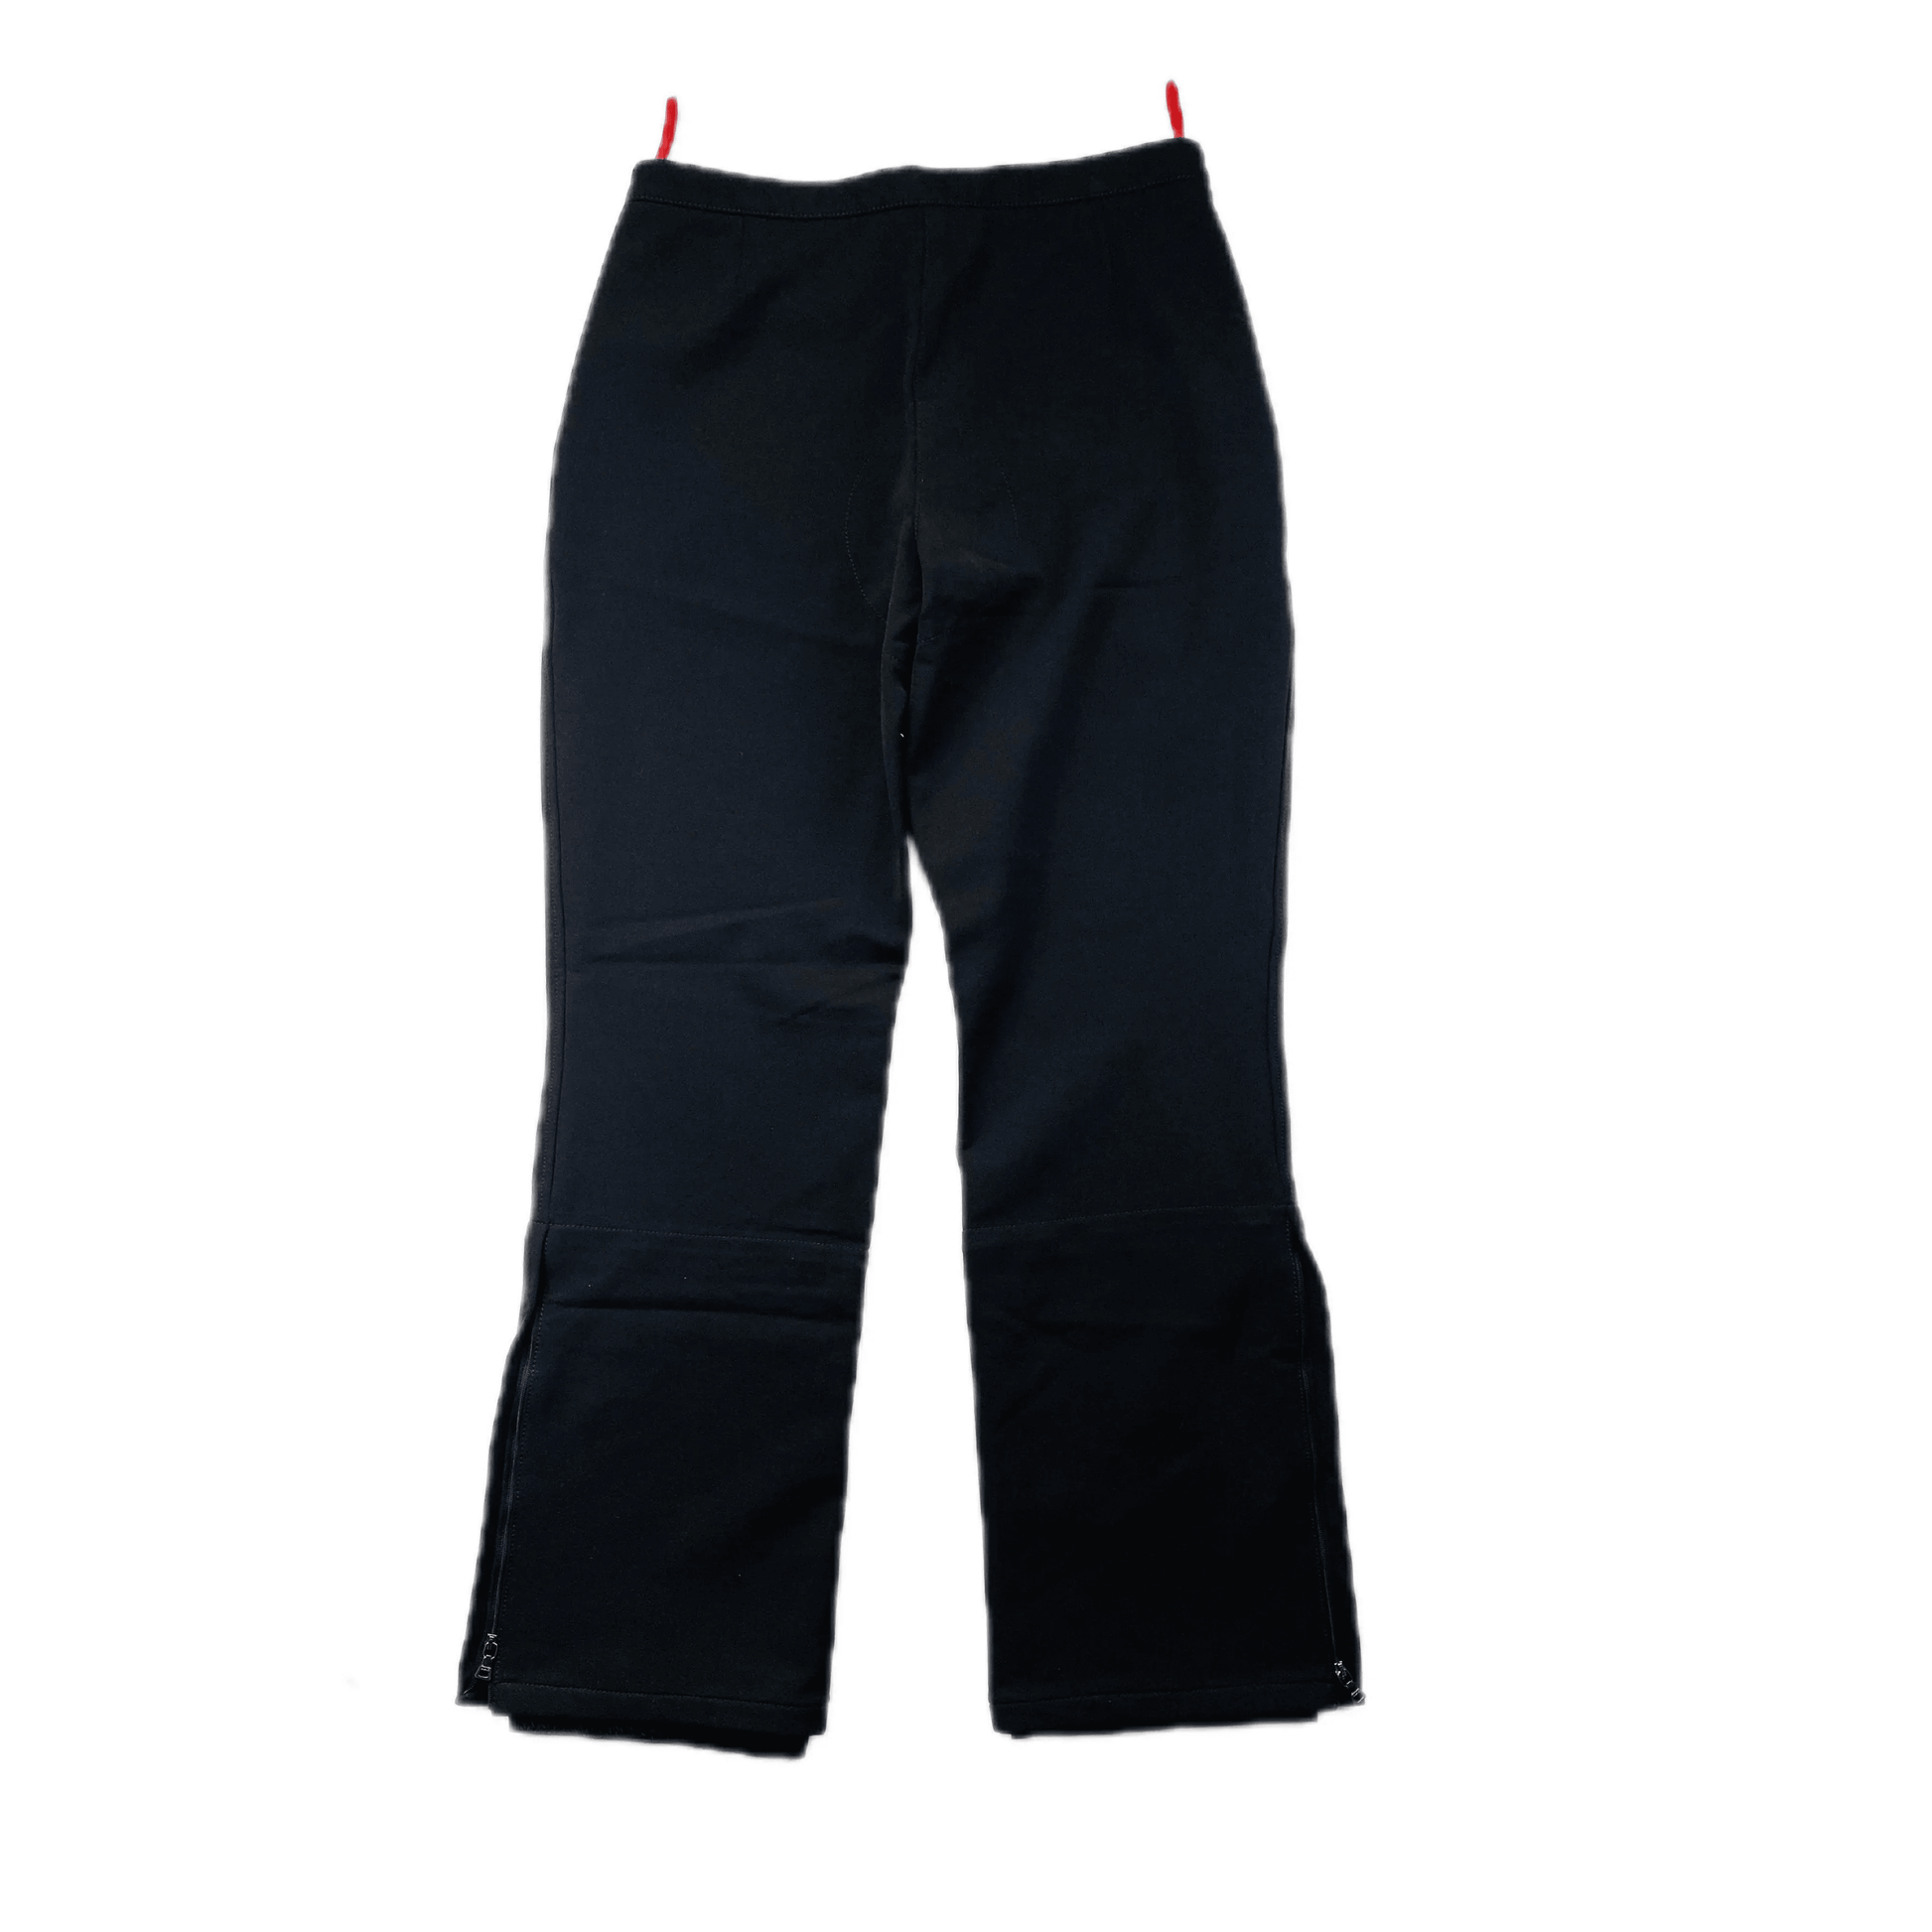 PRADA 1999 GORETEX REMOVABLE ANKLE WARMERS TROUSERS - Known Source